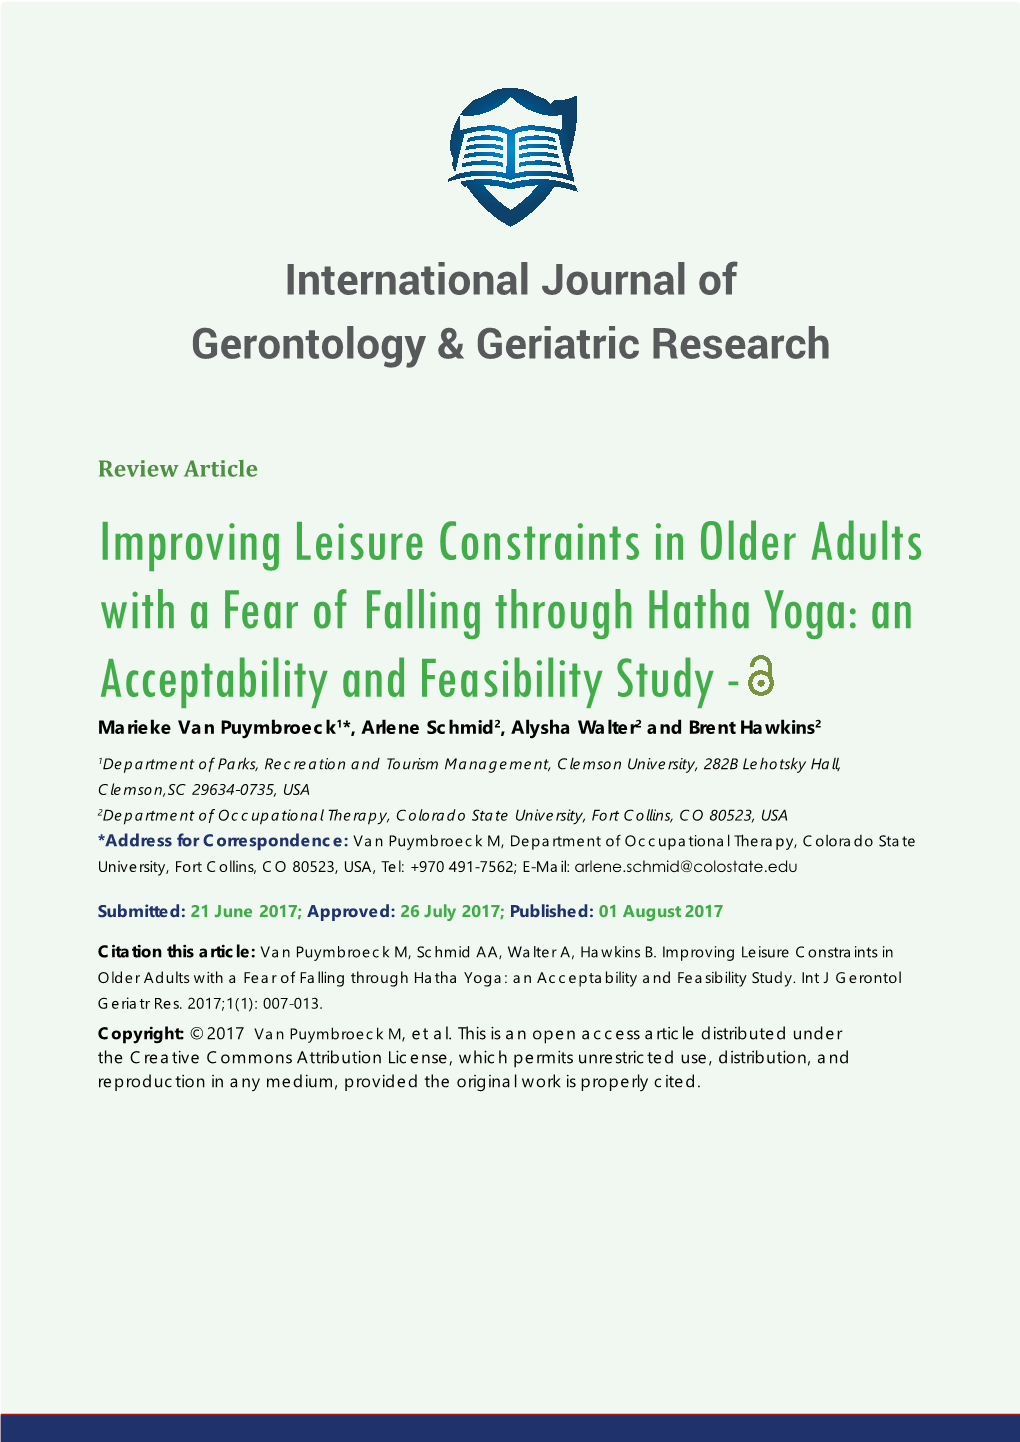 Improving Leisure Constraints in Older Adults